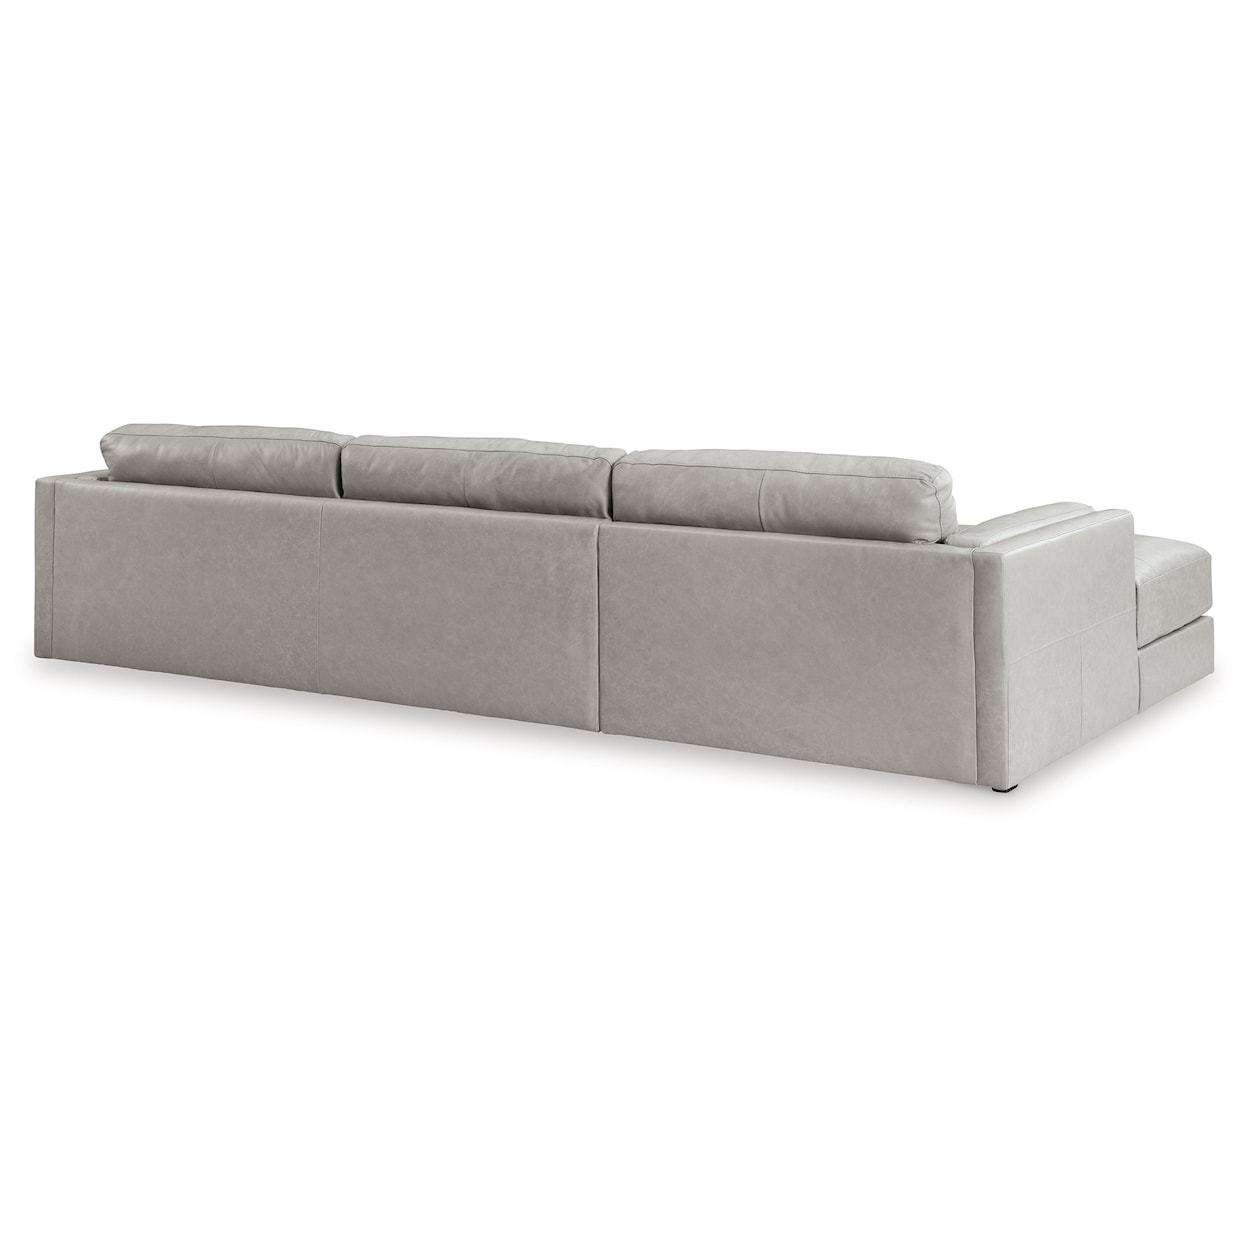 Signature Design by Ashley Amiata 2-Piece Sectional With Chaise